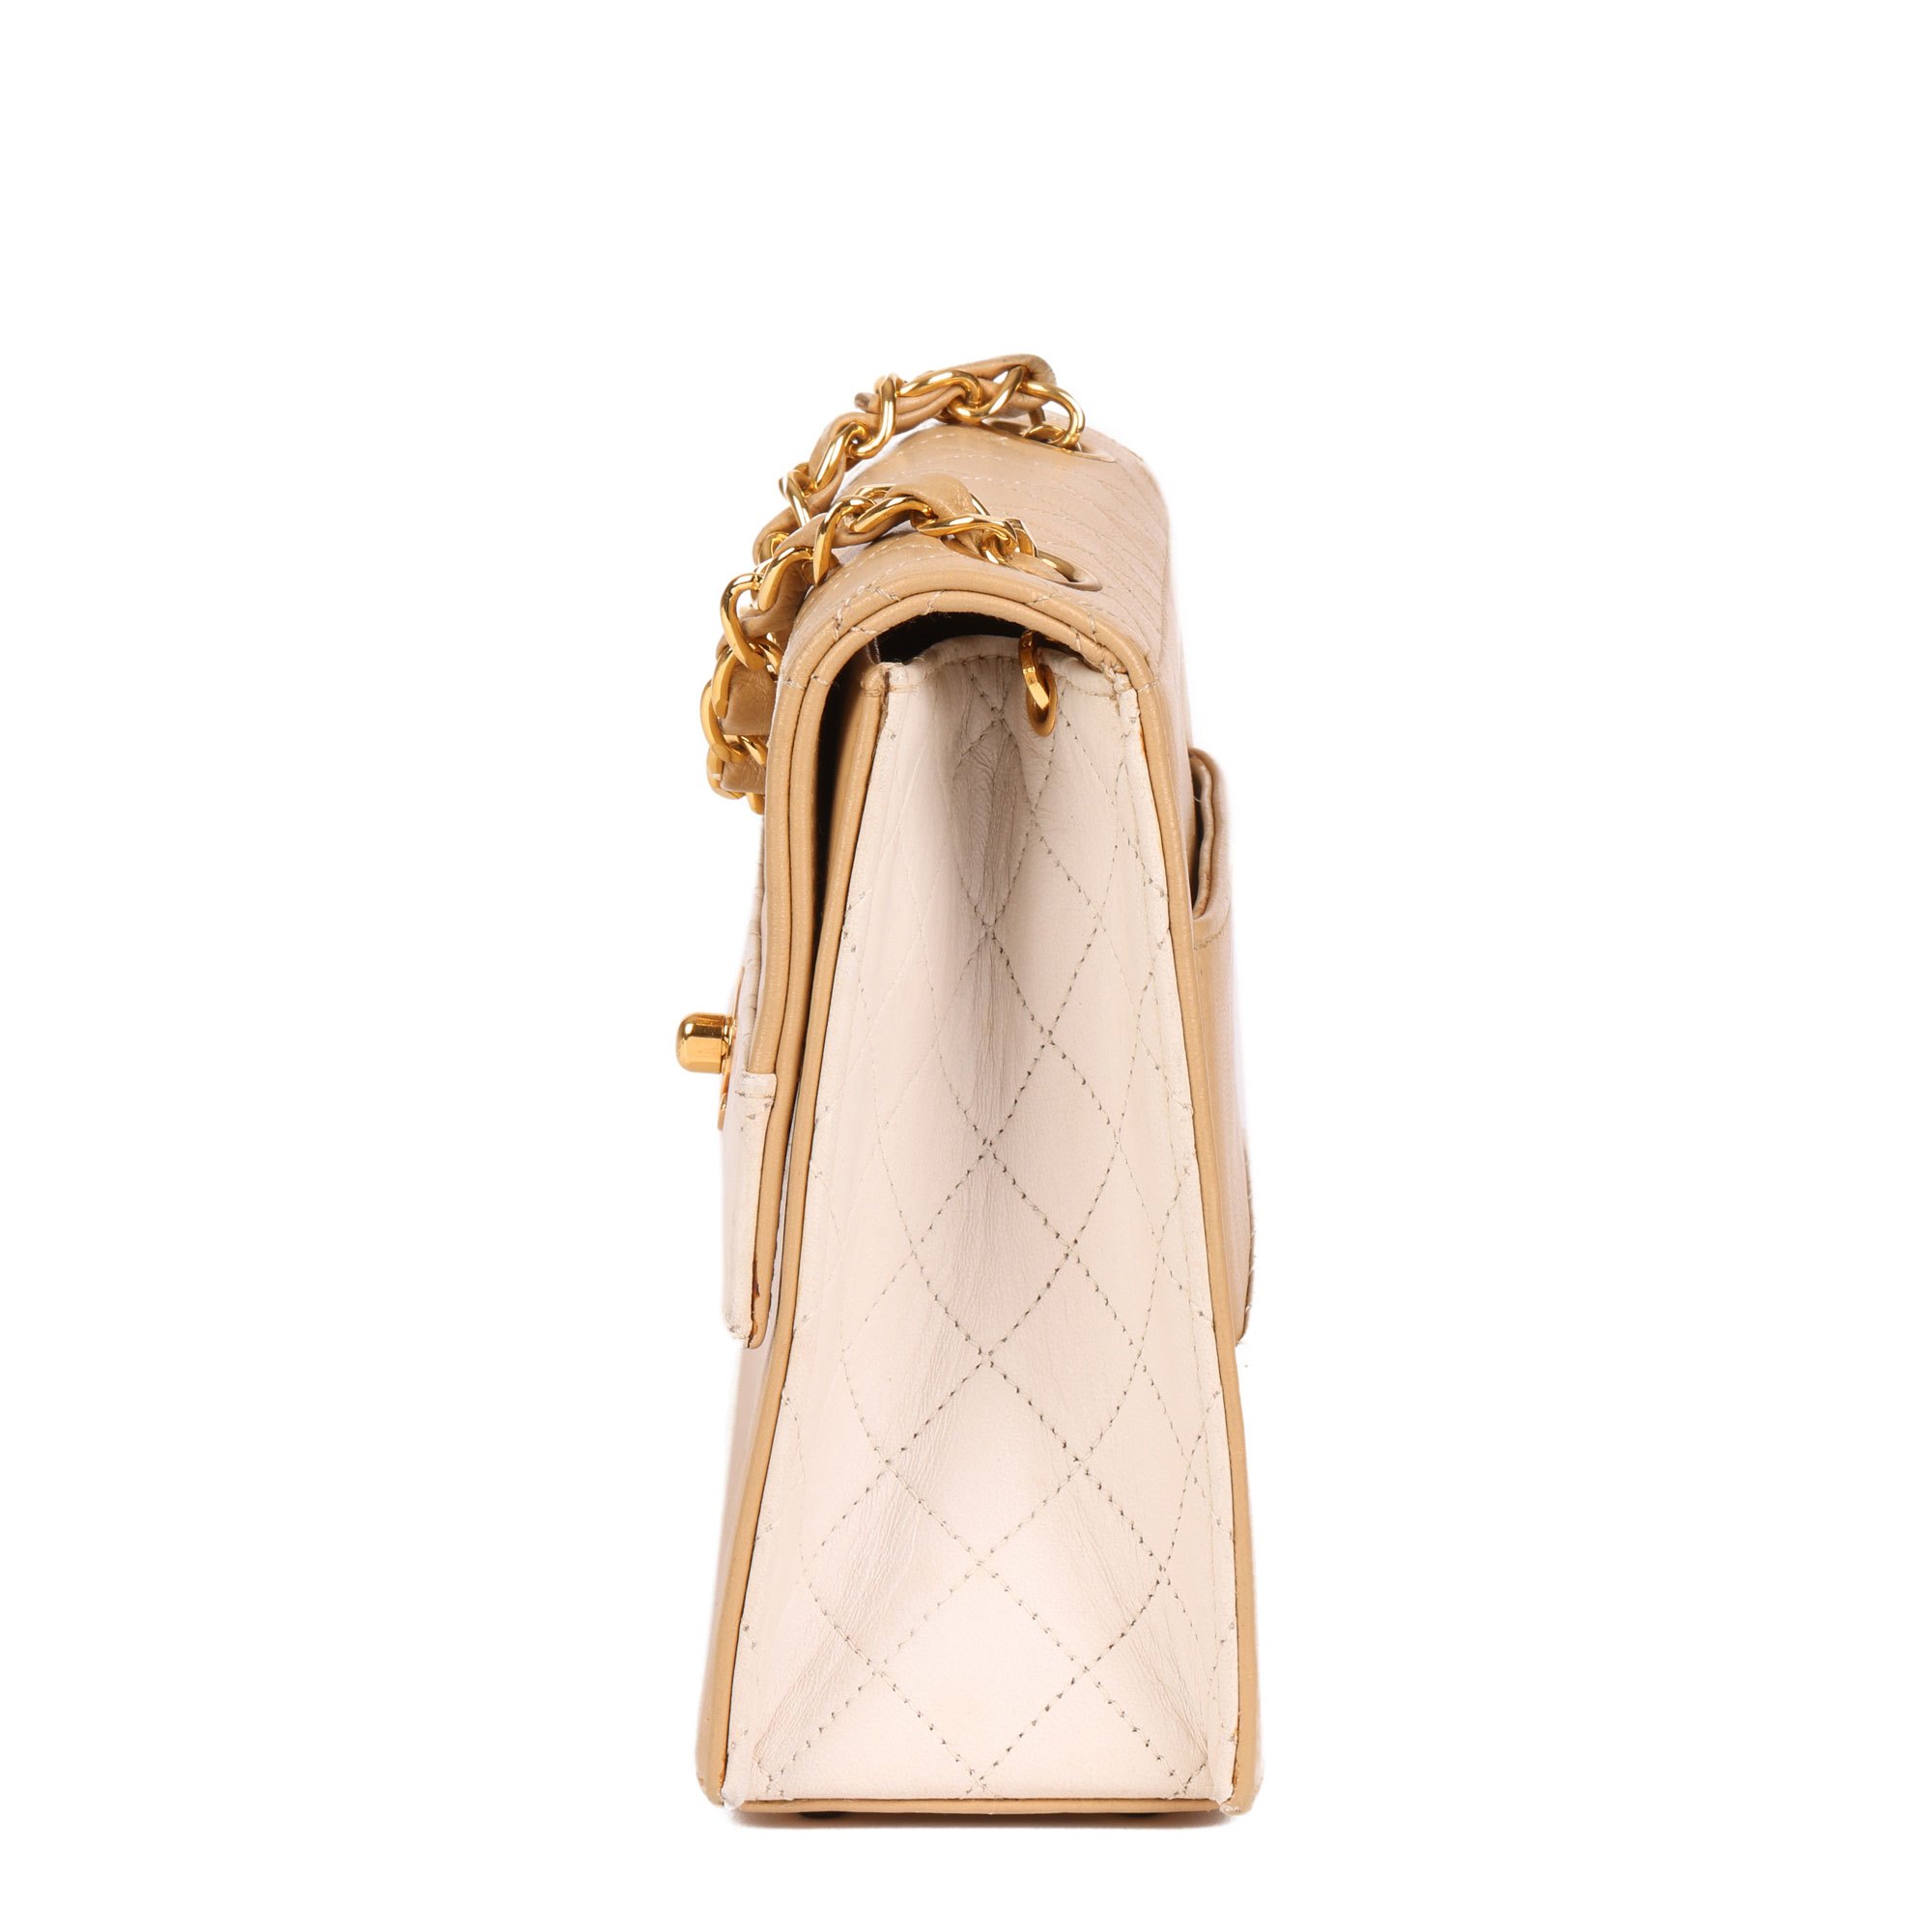 Chanel Beige & White Quilted Lambskin Vintage Mini Trapeze Classic Single Flap Bag with Pouch